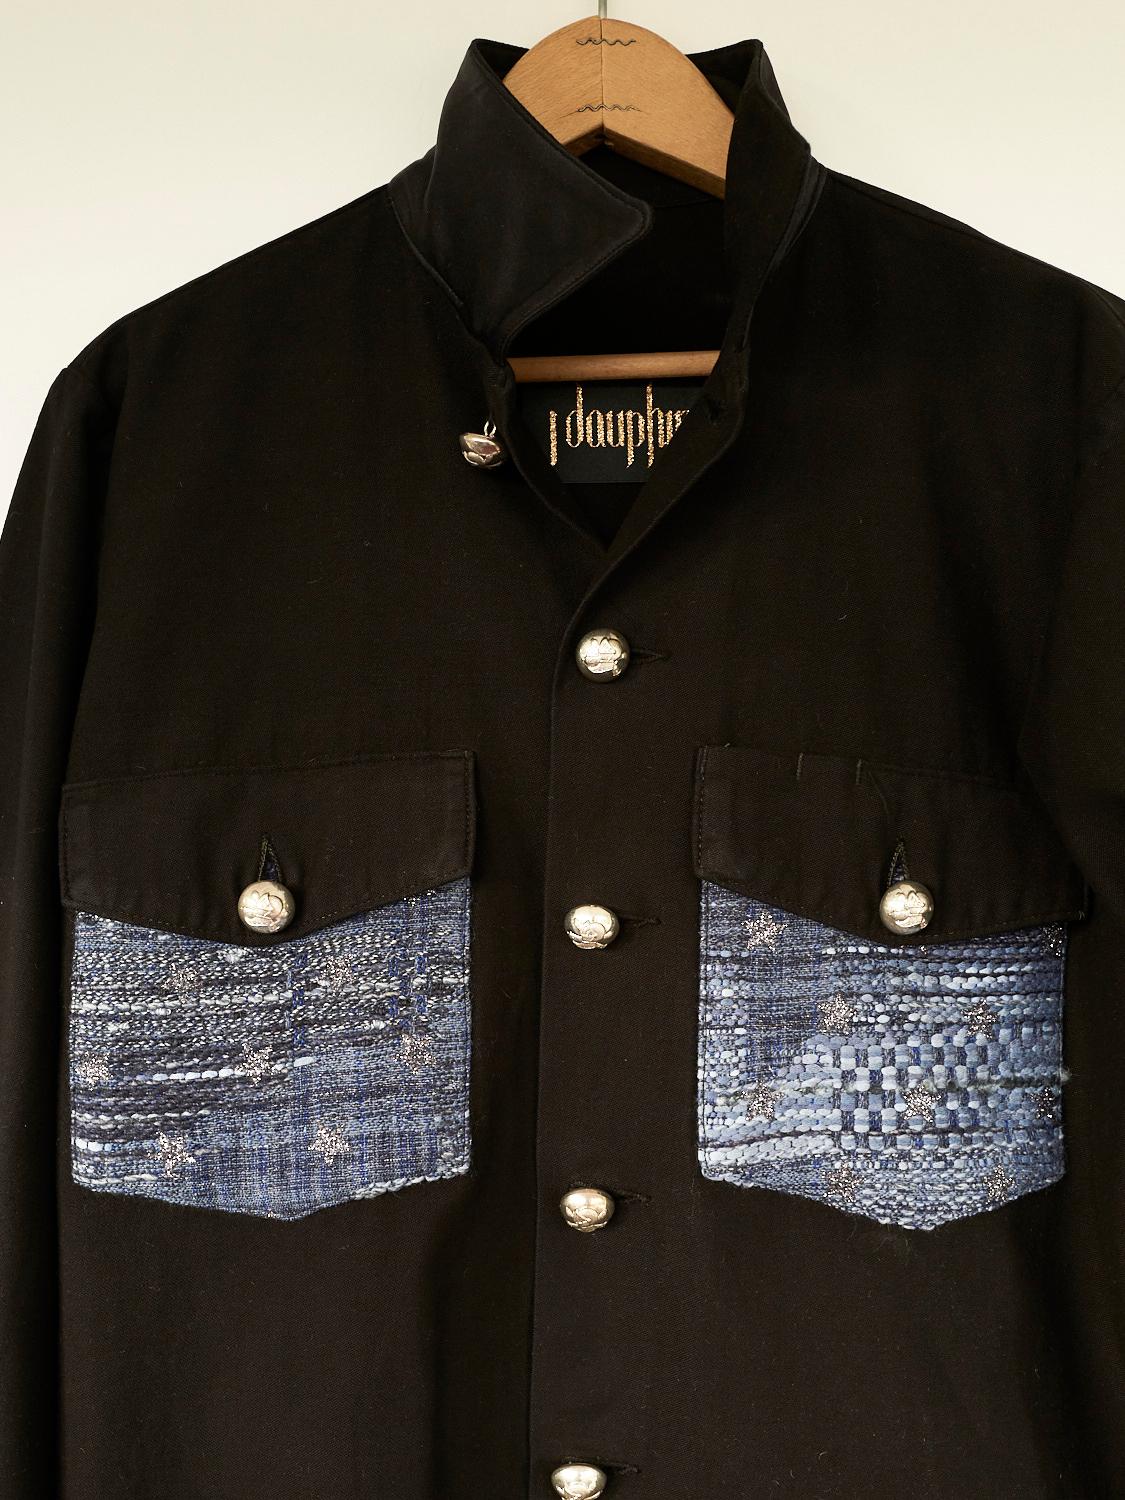 Embellished Jacket French Glitter Tweed Black Military Silver Buttons J Dauphin
Upcycled Vintage, Sustainable Luxury

Our Up-cycled Vintage Jackets are made from vintage, natural fibers, military clothing and french workwear from the period